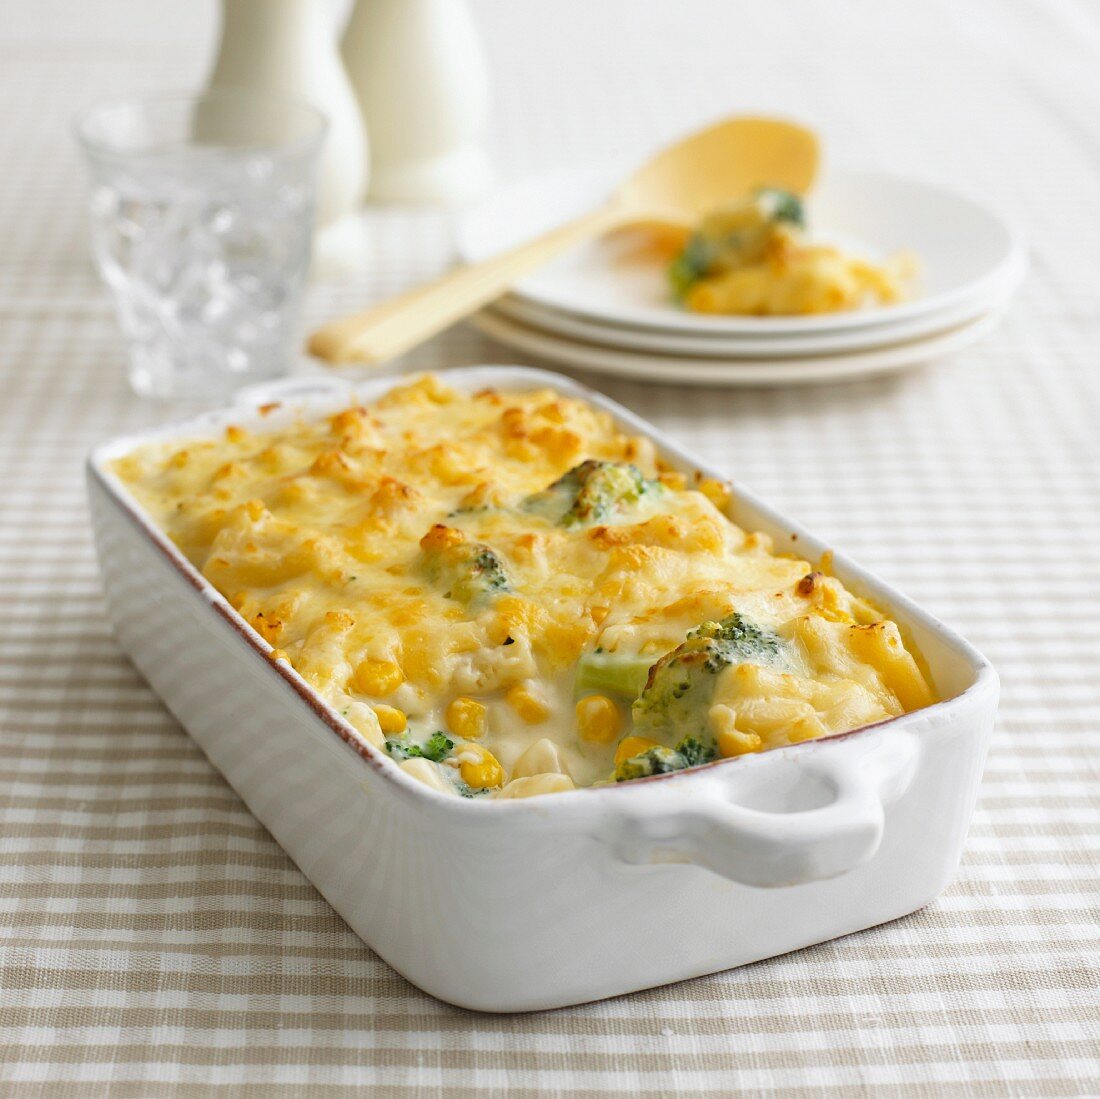 Pasta bake with sweetcorn, broccoli and cheese